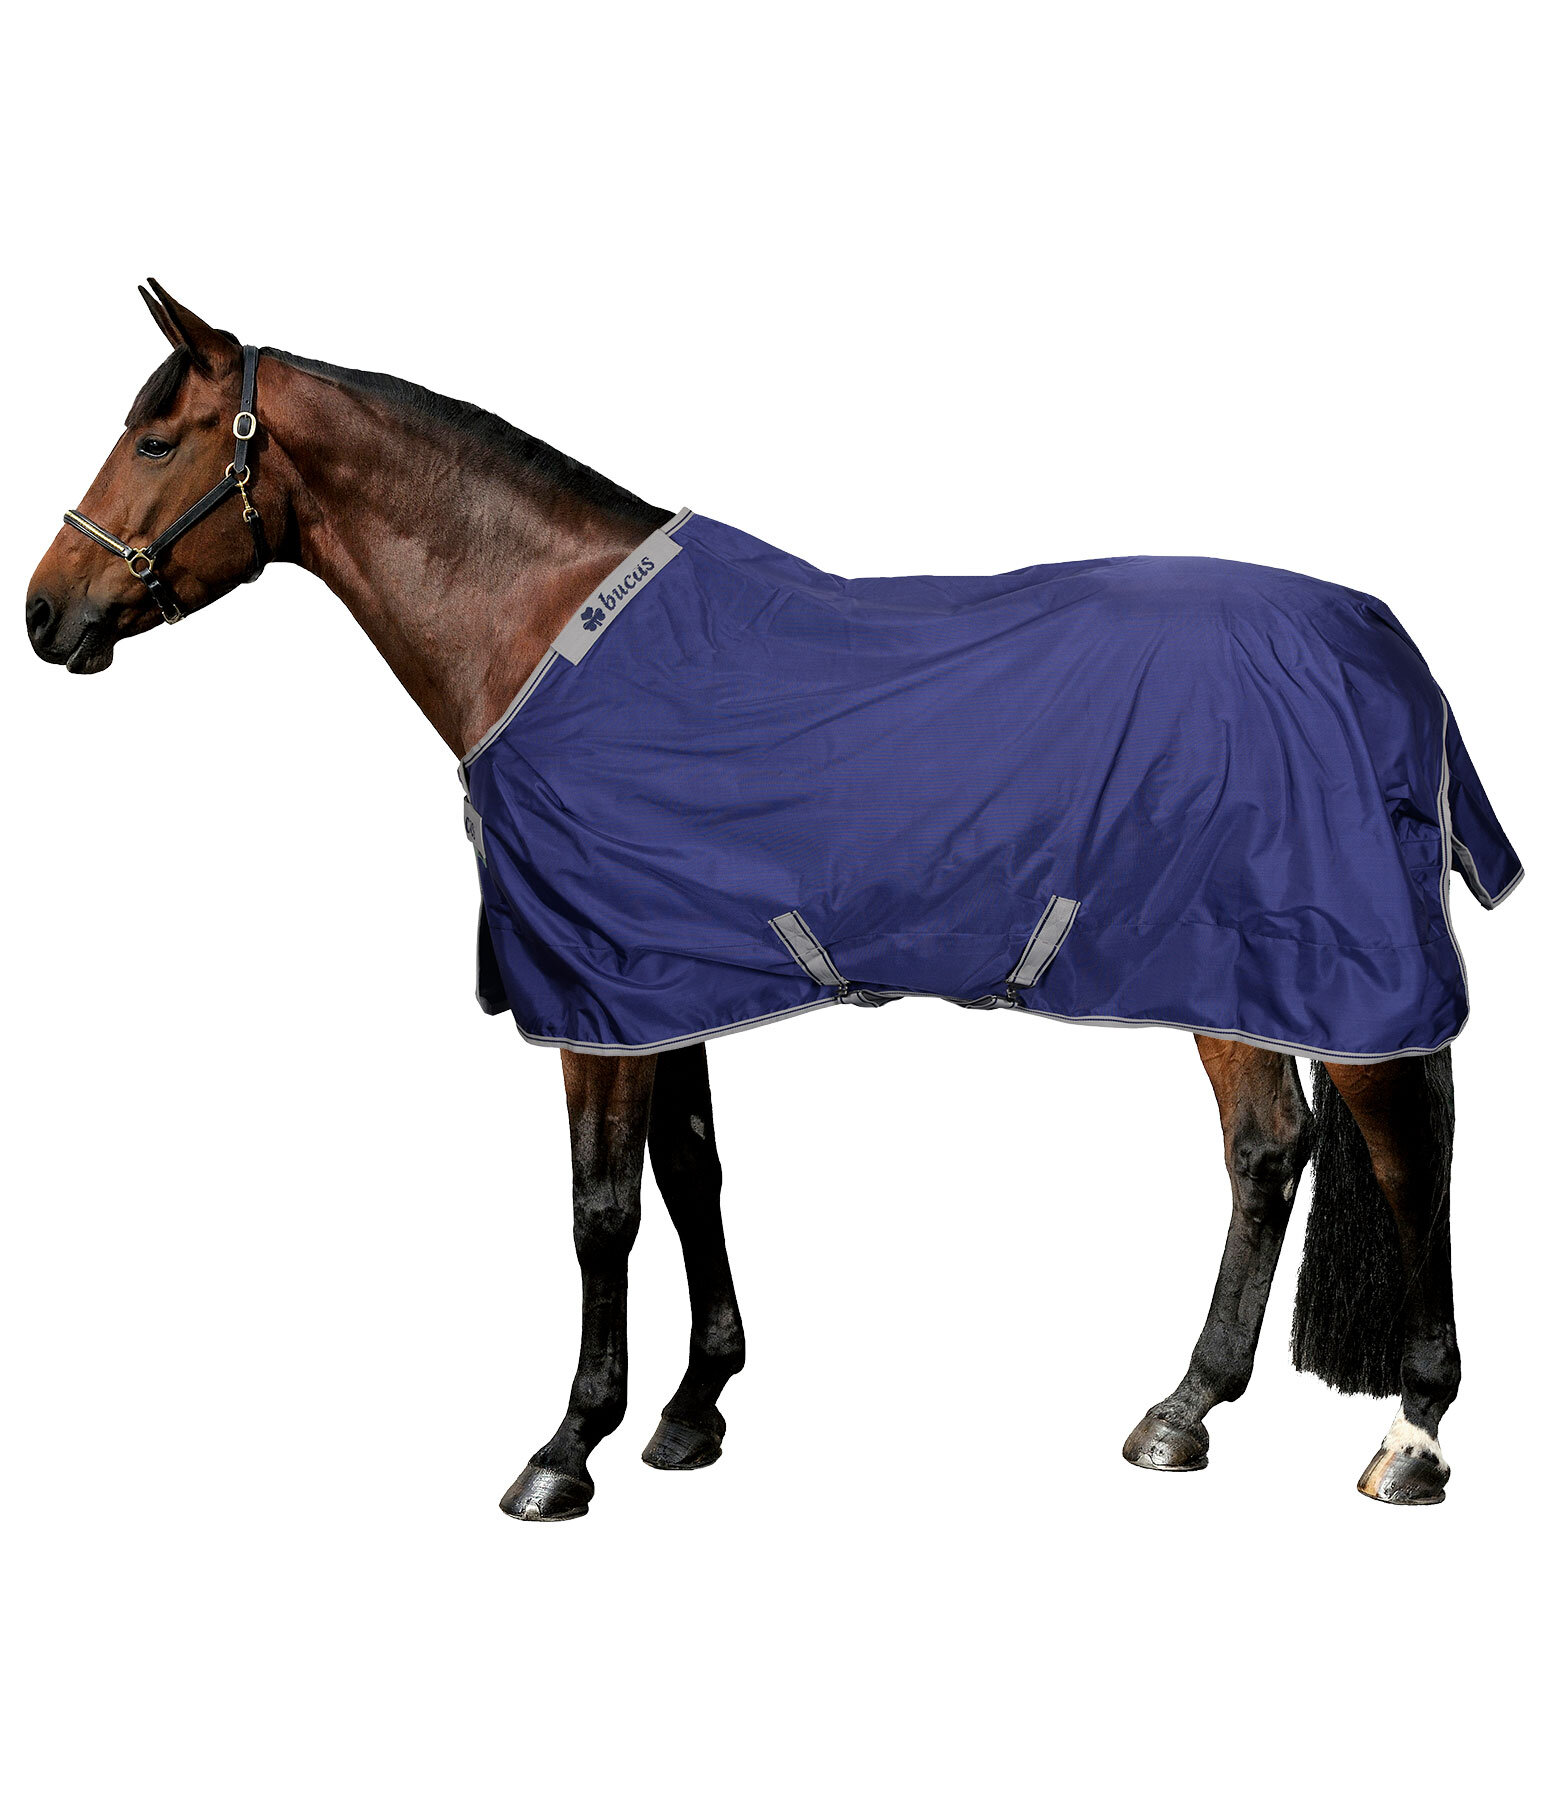 Turnout Rug Atlantic Turnout 50 Regular Neck with Dermo-Care, 50g